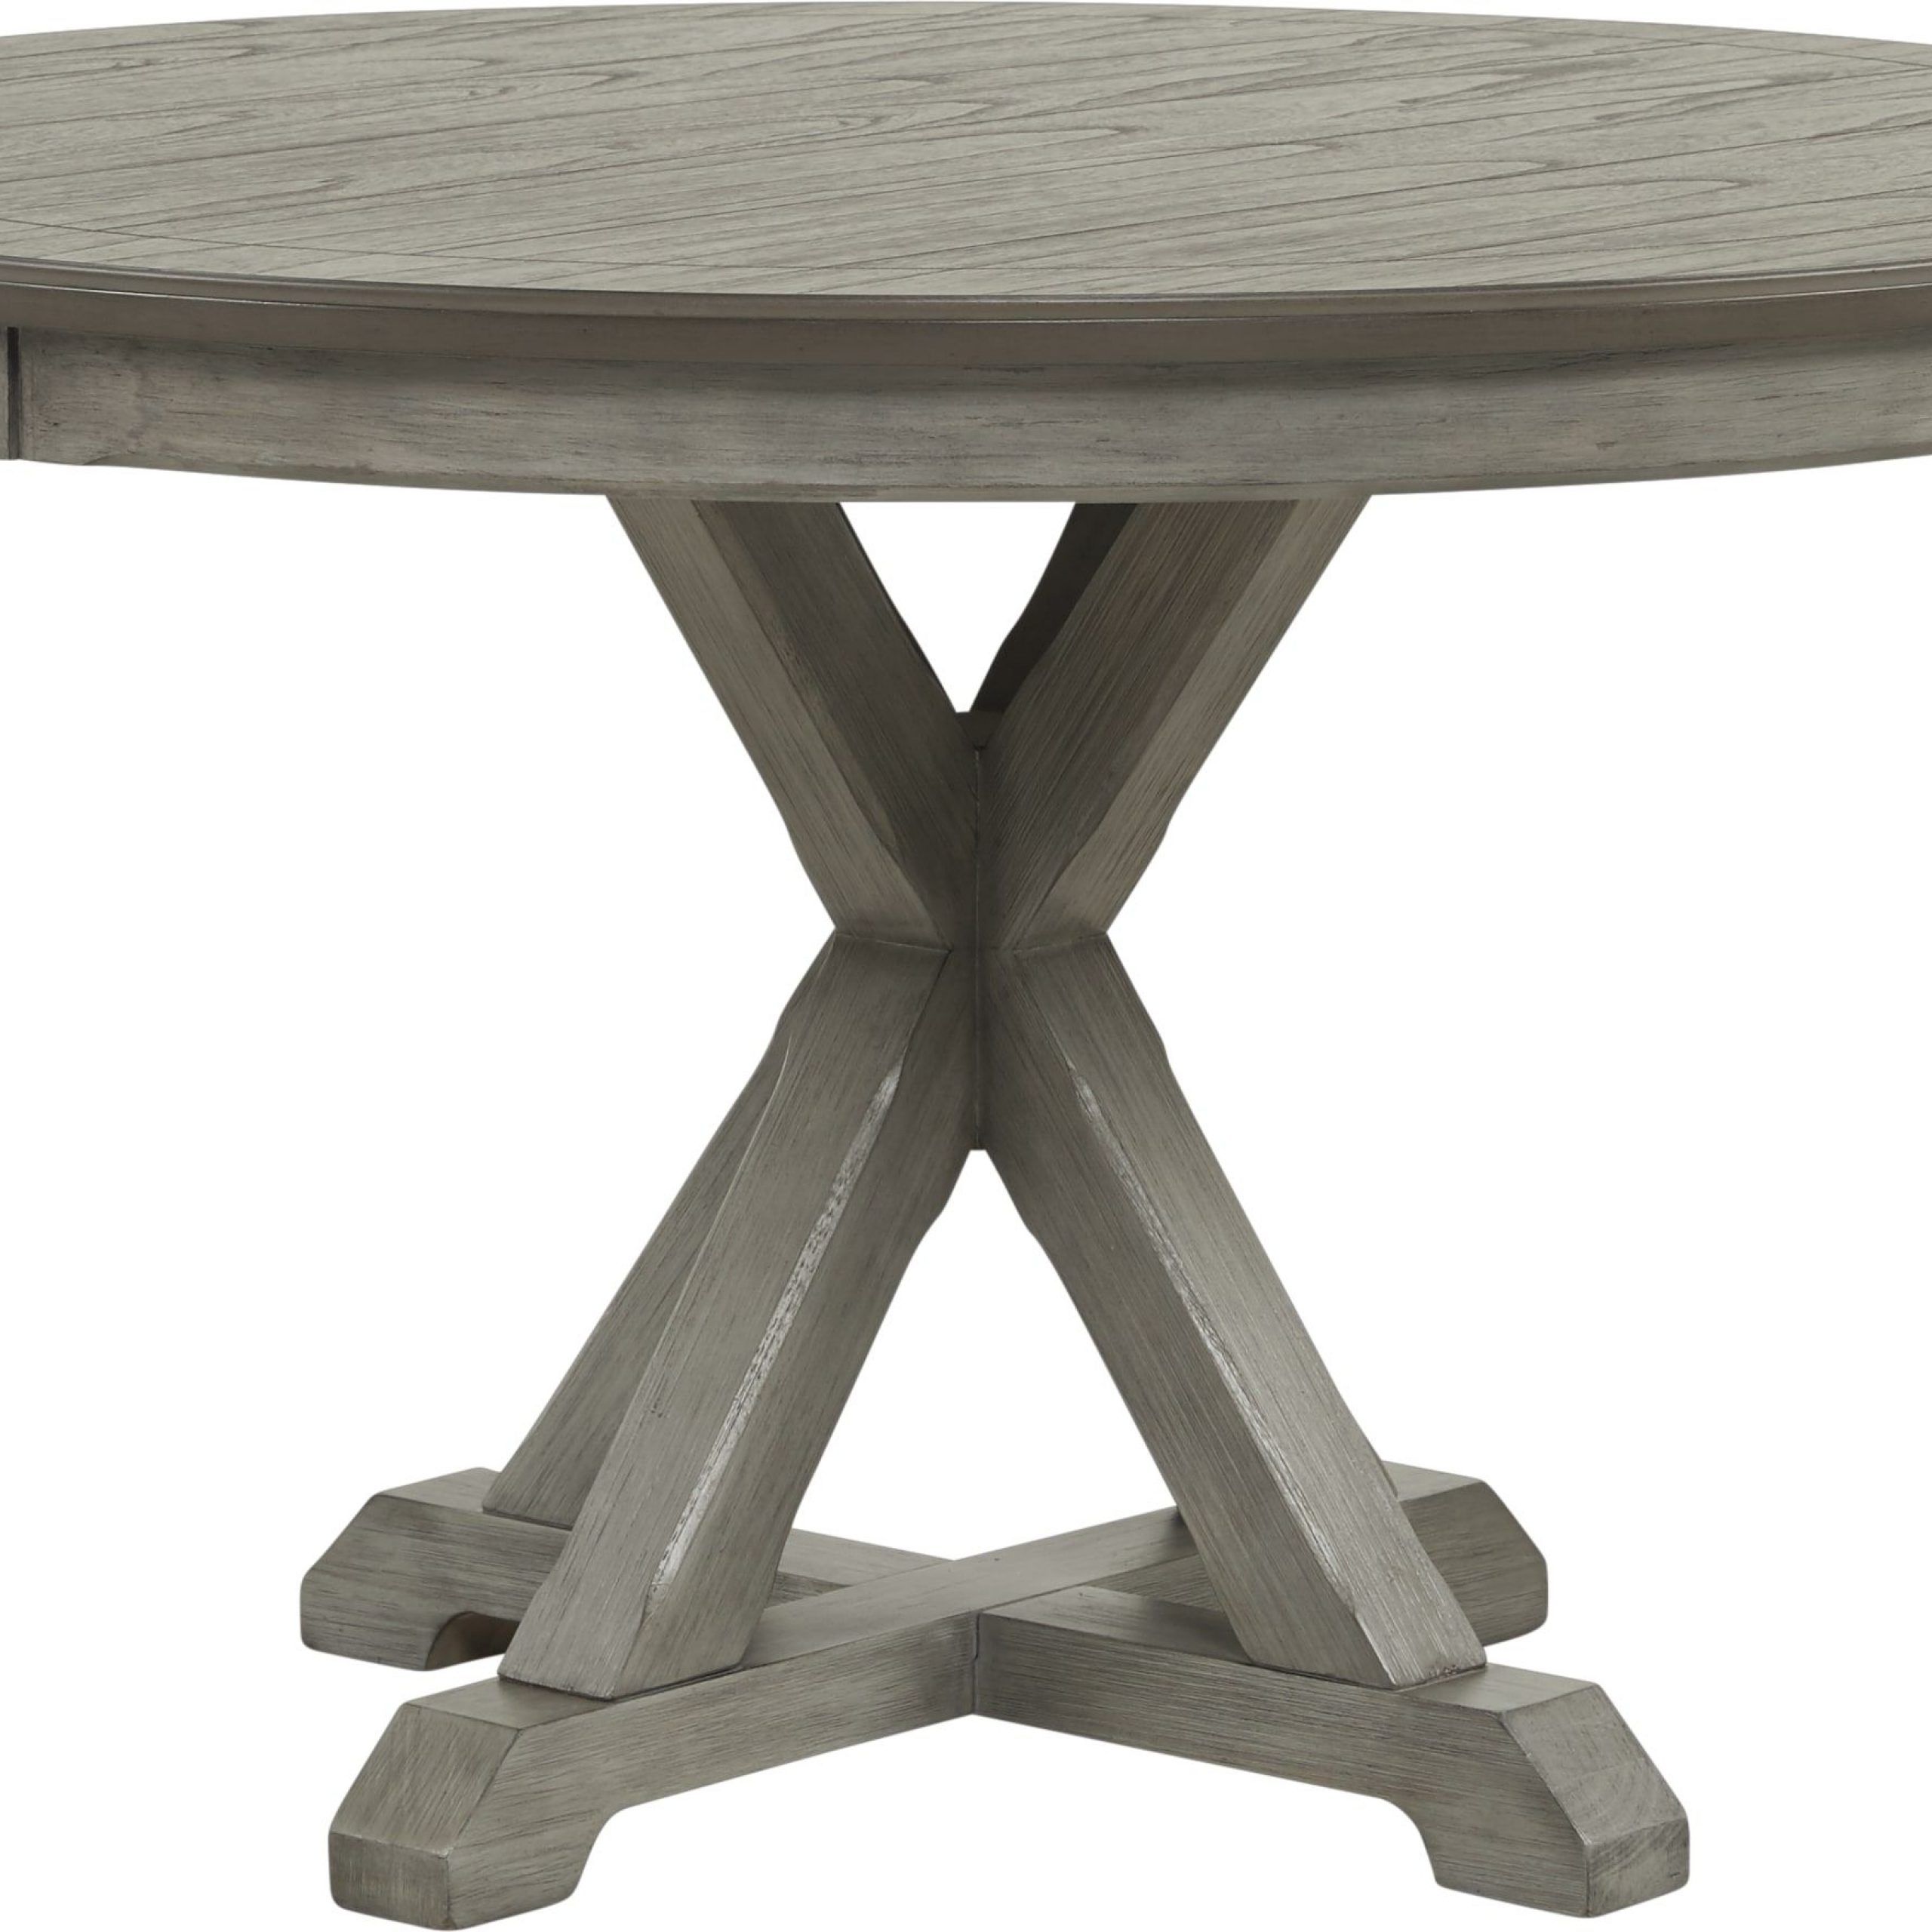 Nantucket Breeze Gray Round Dining Table .399.99. 52diameter Inside Fashionable Black Olive Hart Reclaimed Pedestal Extending Dining Tables (Photo 4 of 25)